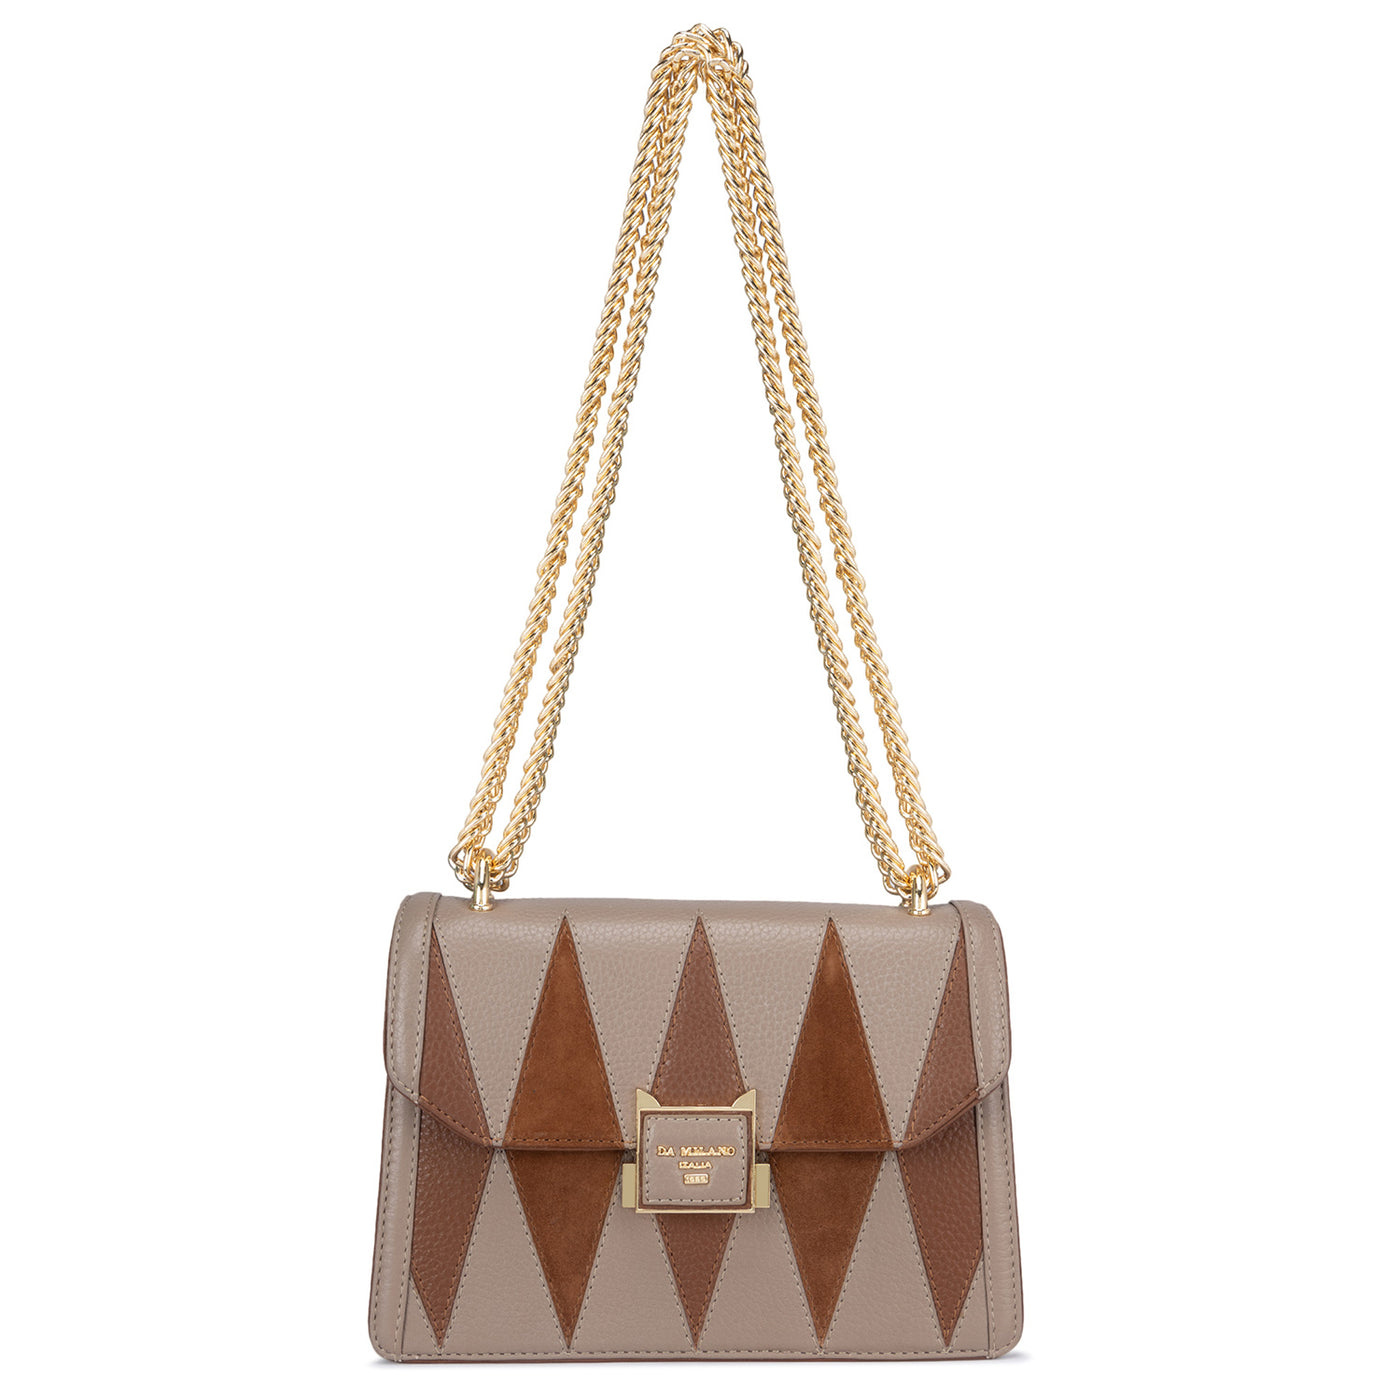 Small Wax Leather Shoulder Bag - Taupe